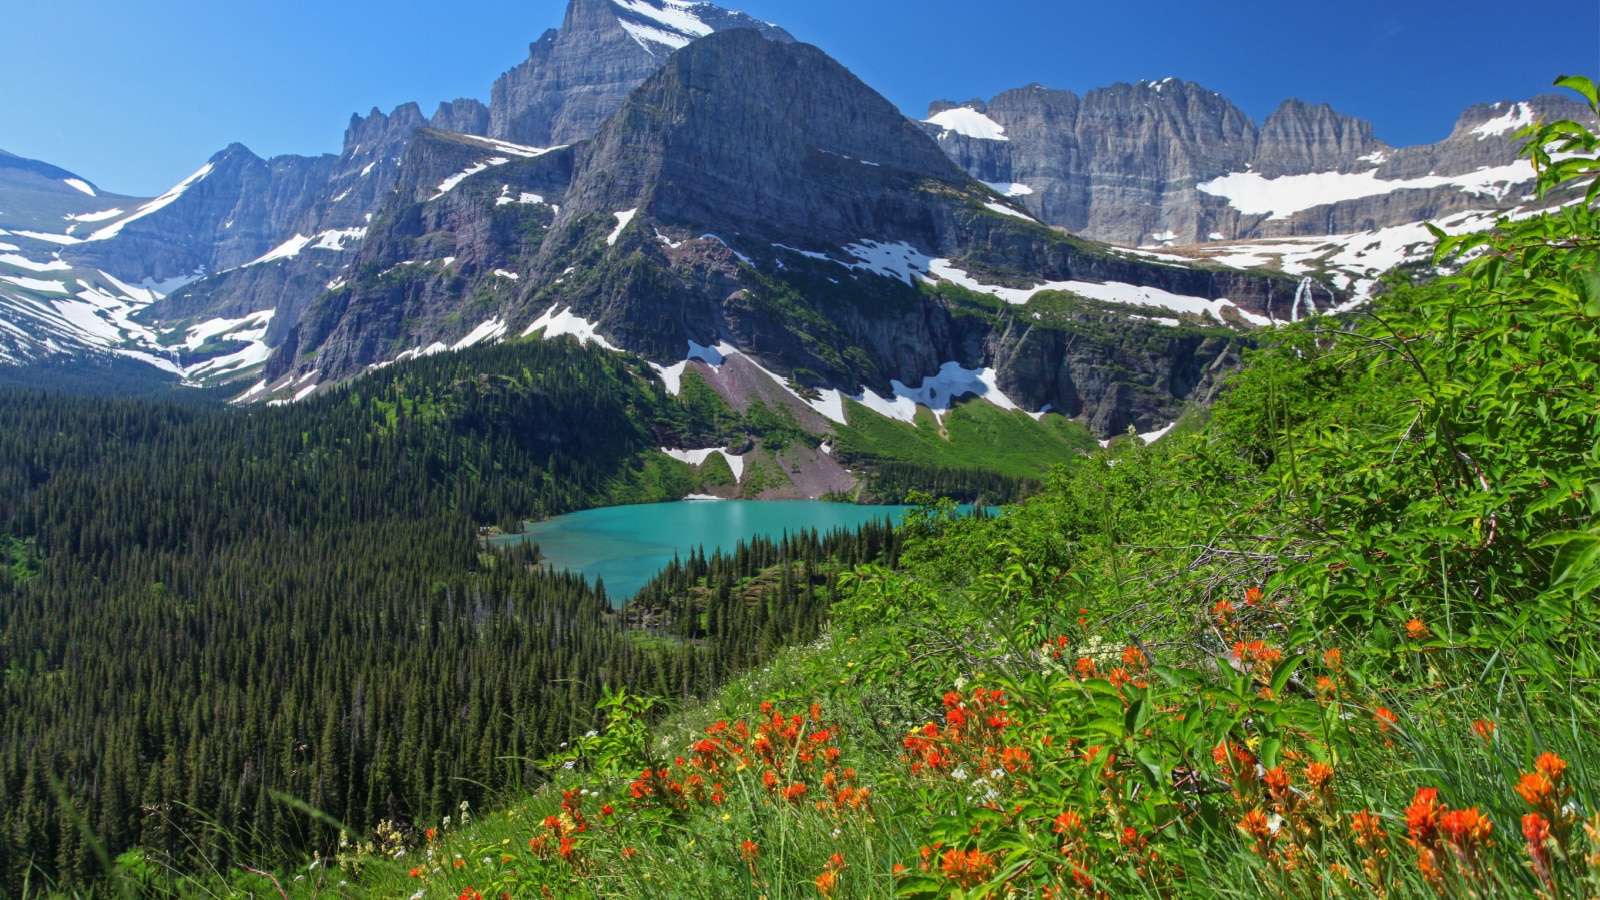 <p>Nestled in the northern Rockies, this park is renowned for its rugged mountain peaks, pristine lakes, and glaciers, providing some of the most stunning alpine scenery in the United States.</p>